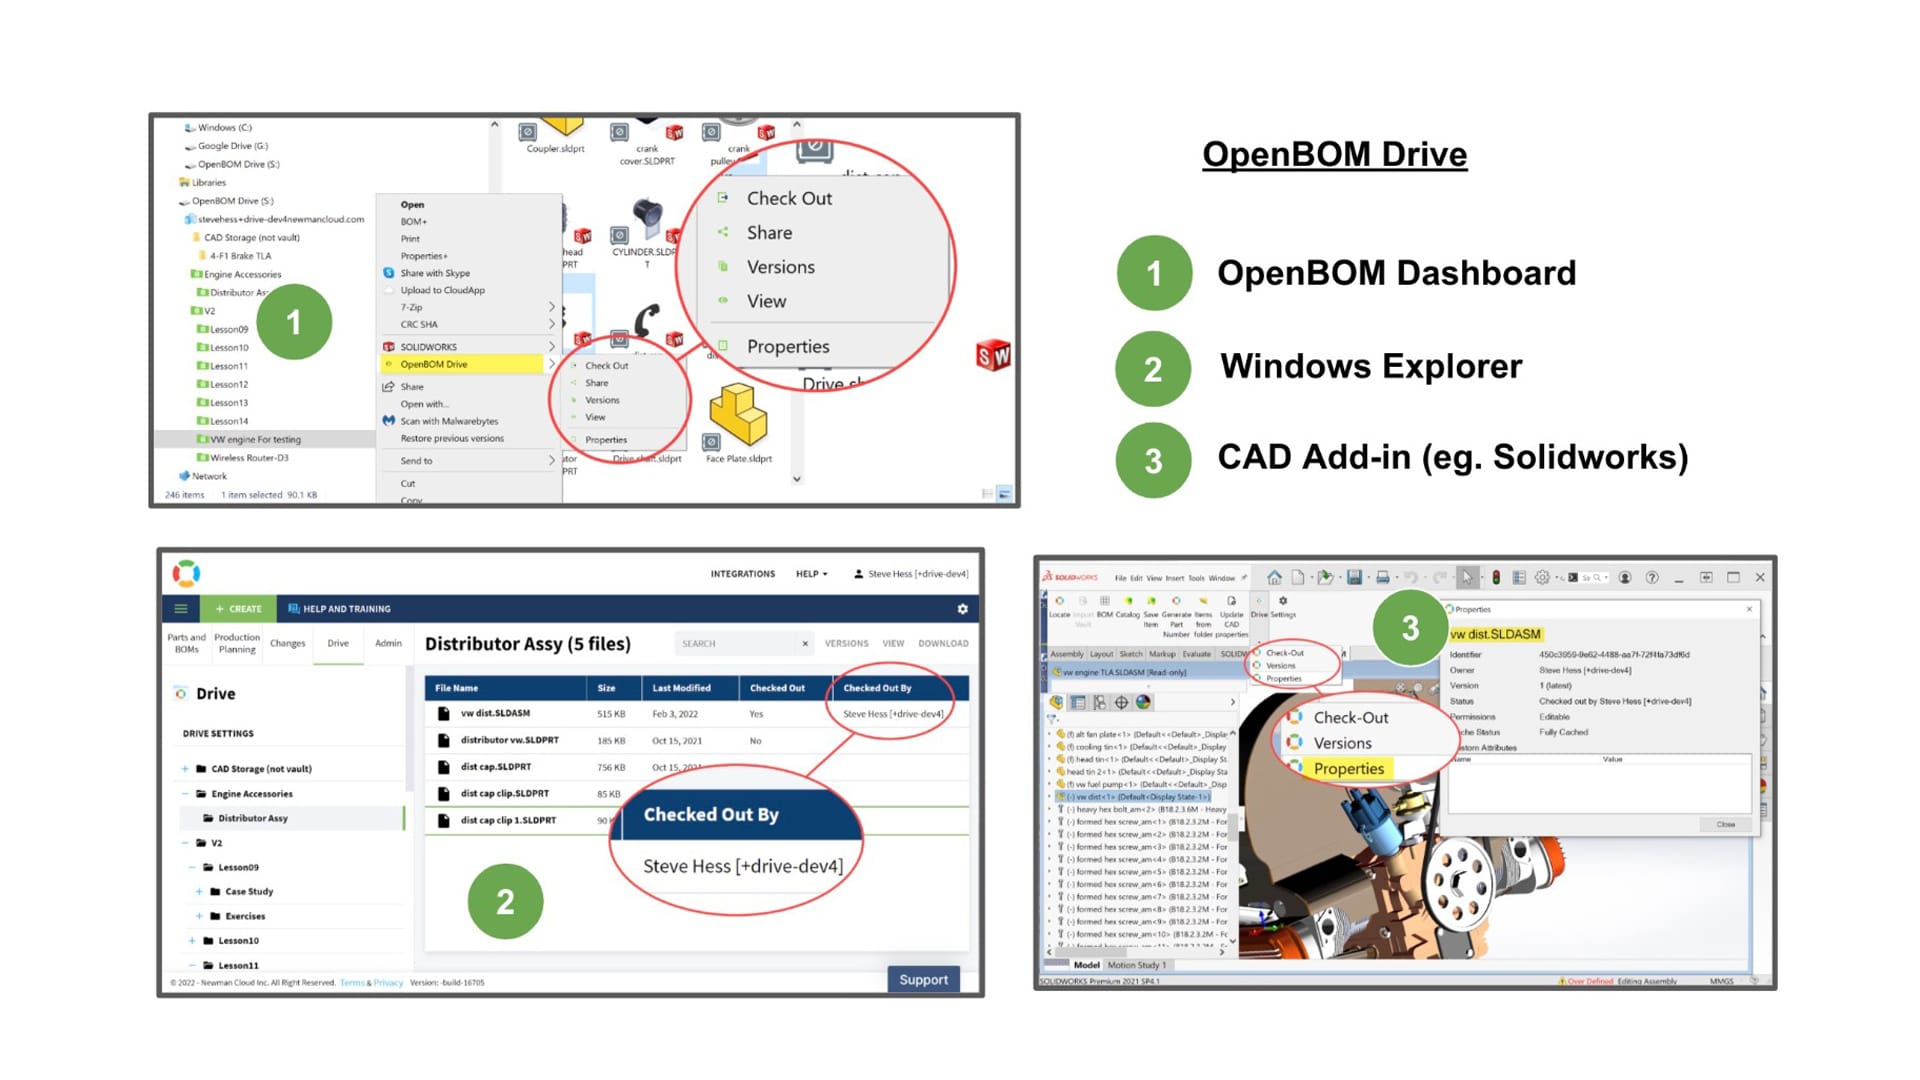 OpenBOM Drive, Cloud Files, and Collaboration